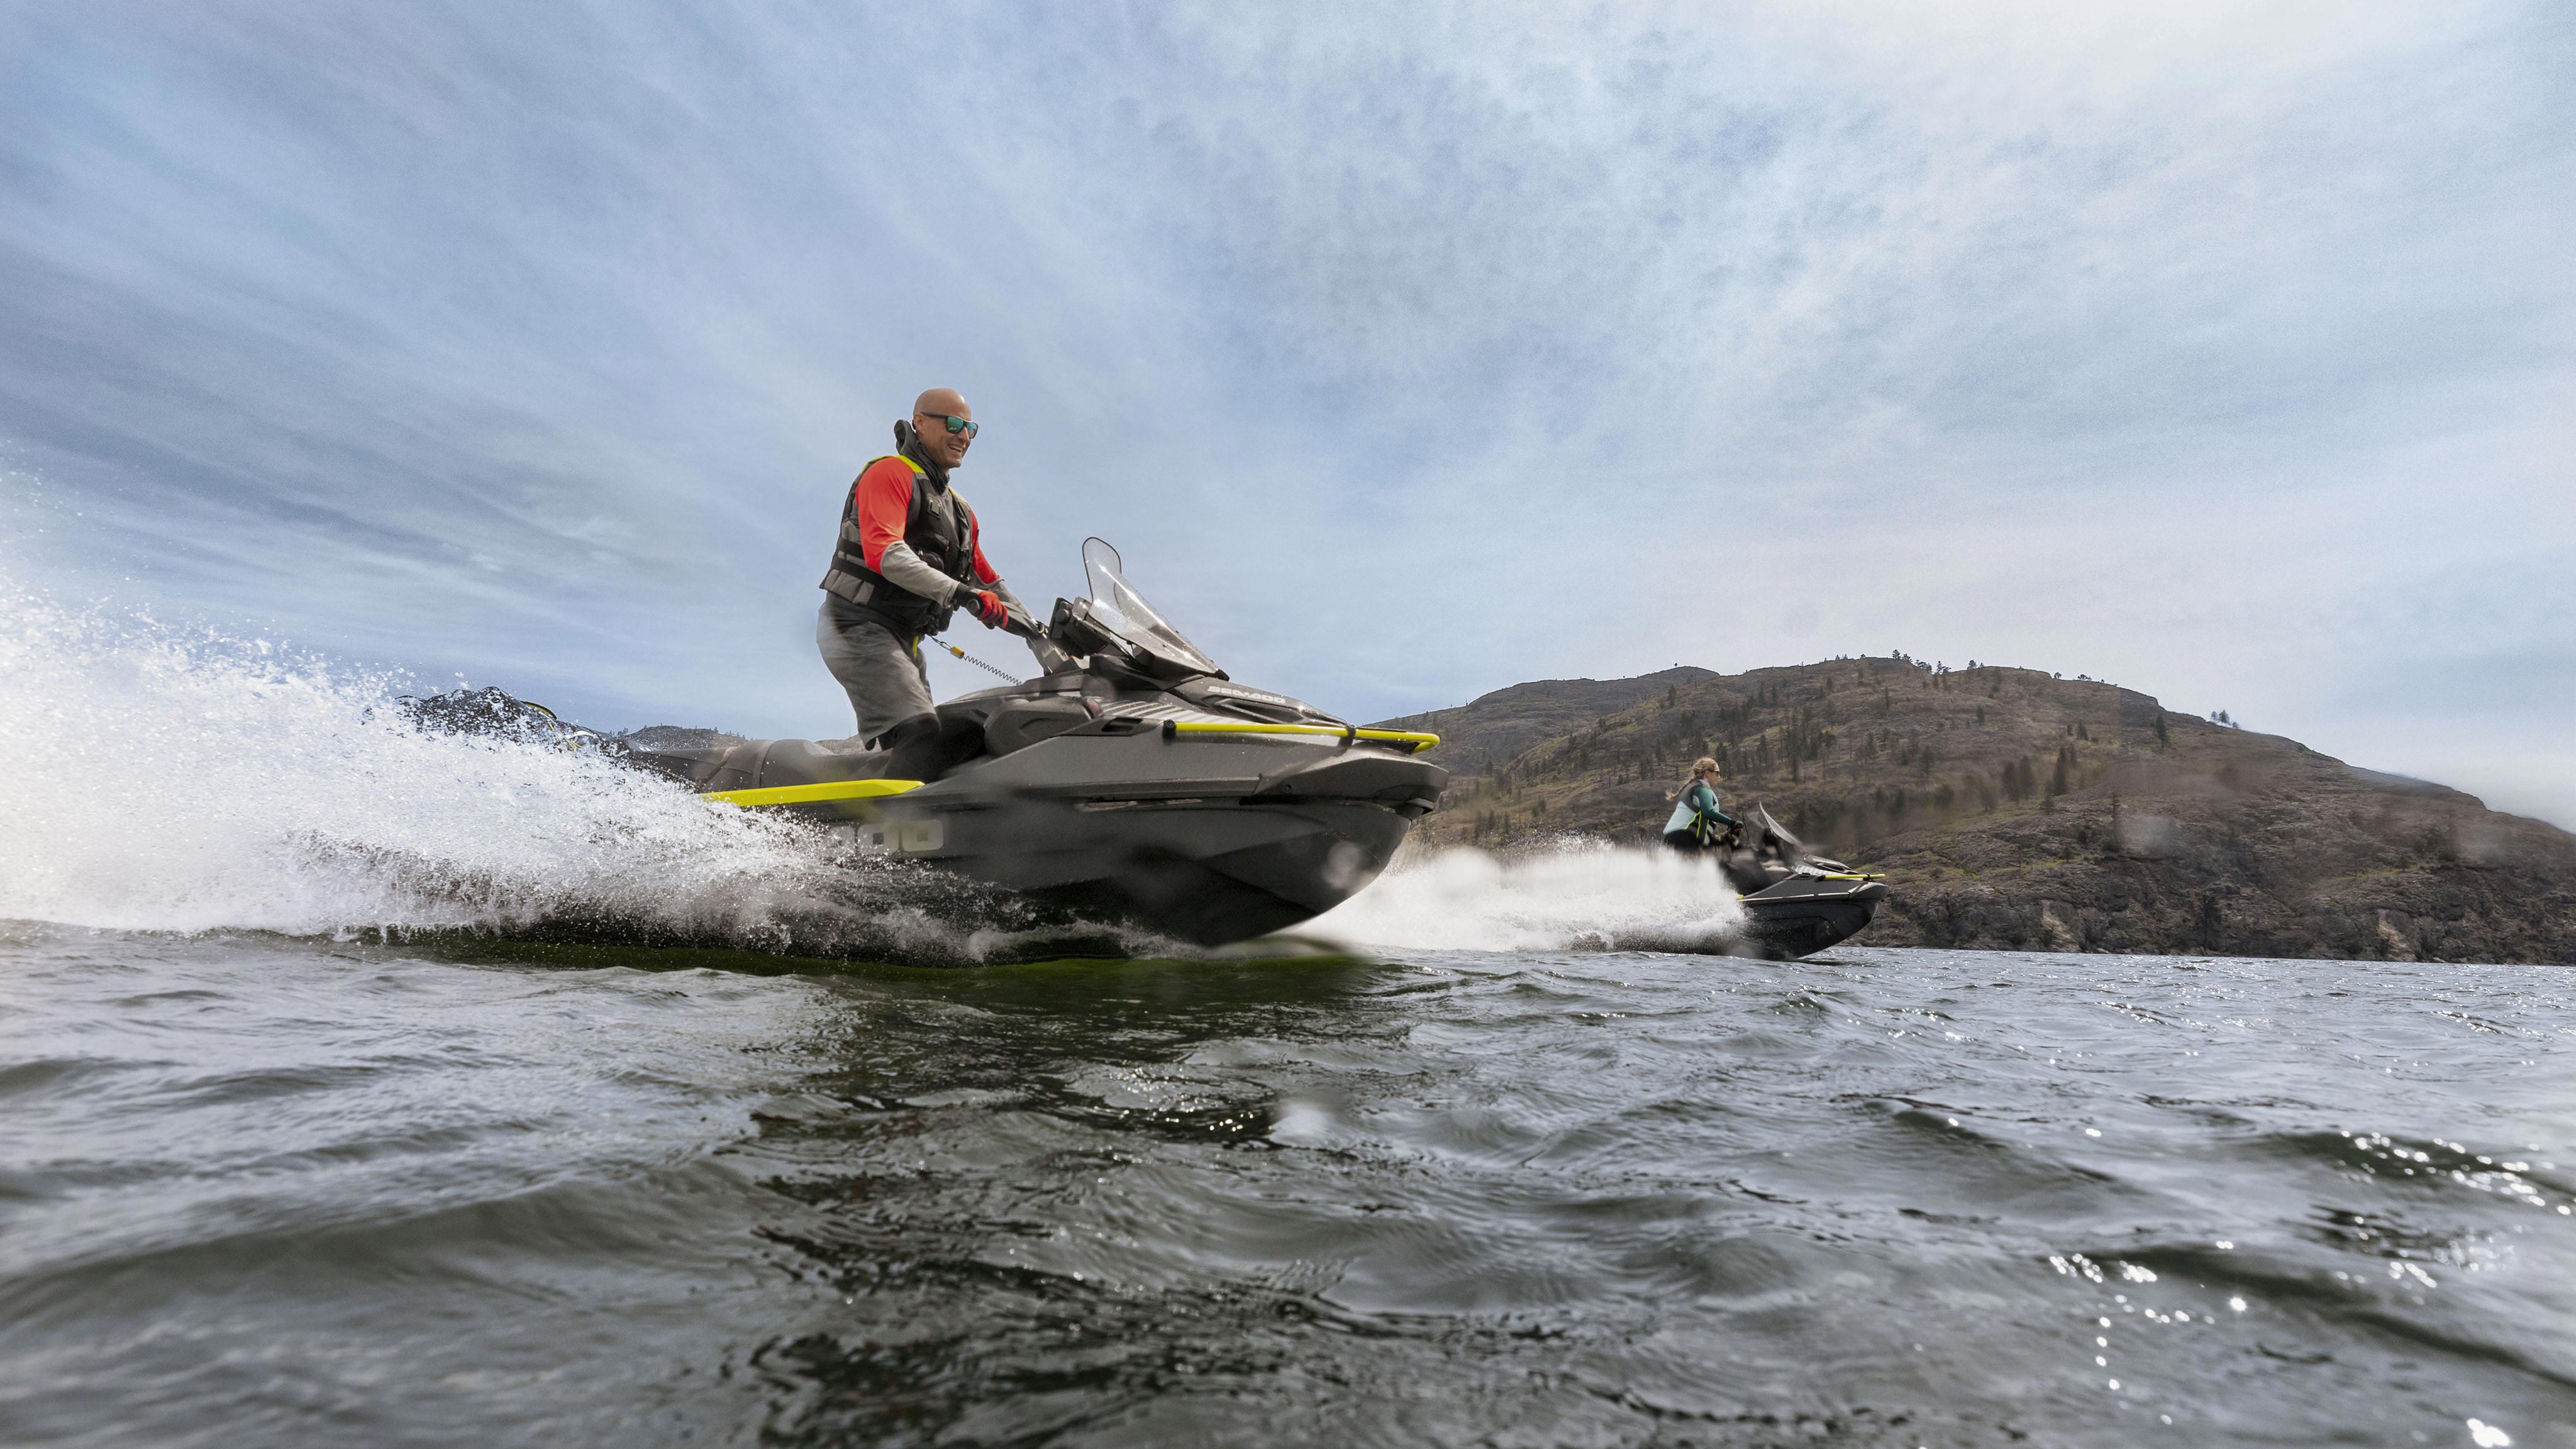 Two riders driving the new Sea-Doo Explorer Pro 